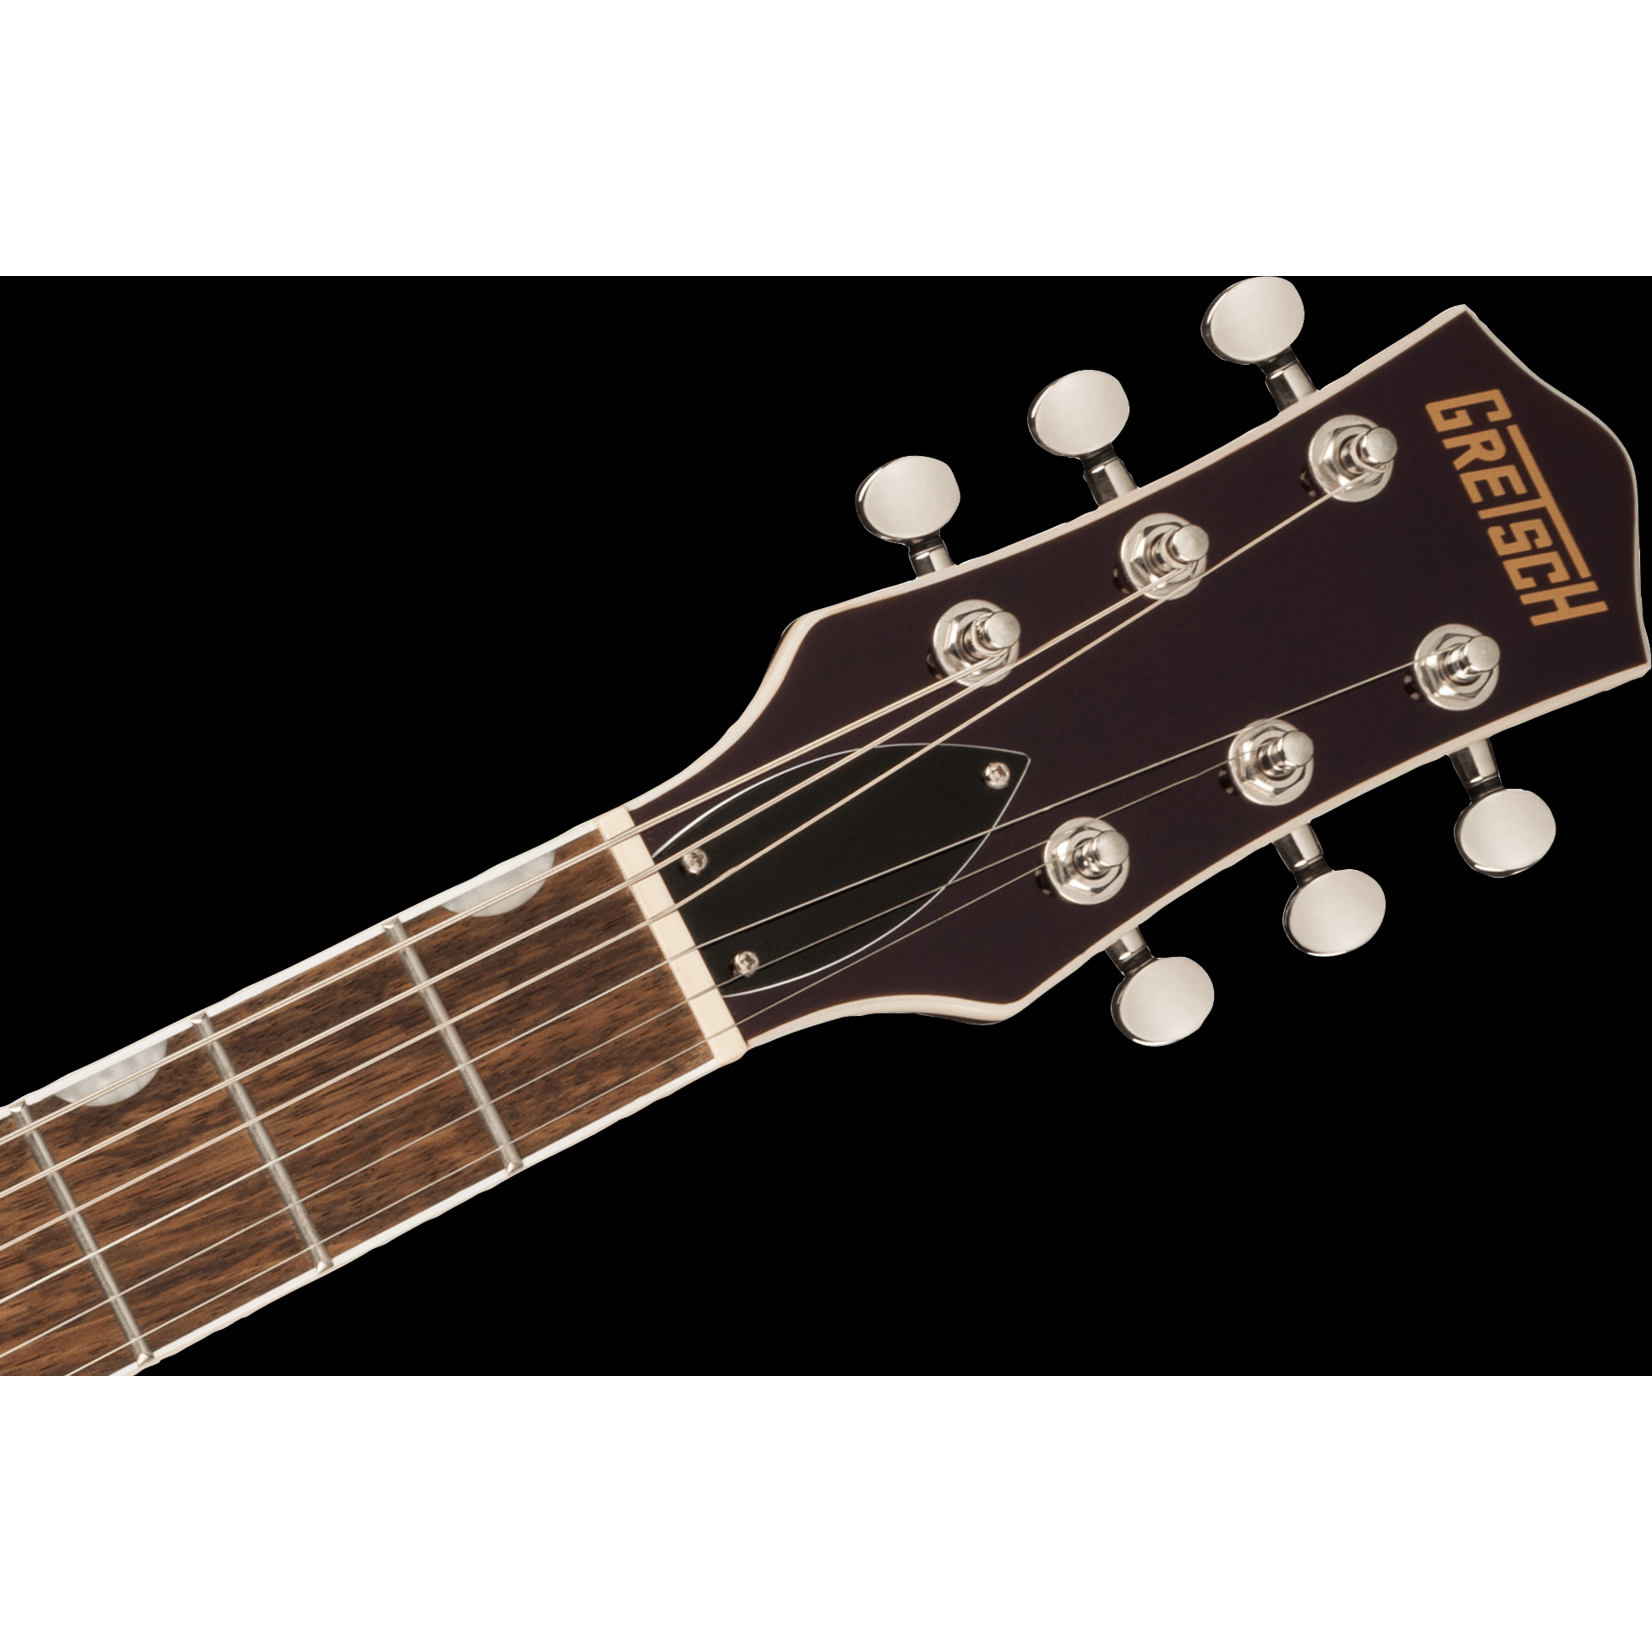 Gretsch G5210-P90 Electromatic Jet Two 90 Single-Cut with Wraparound, Laurel Fingerboard - Cadillac Green